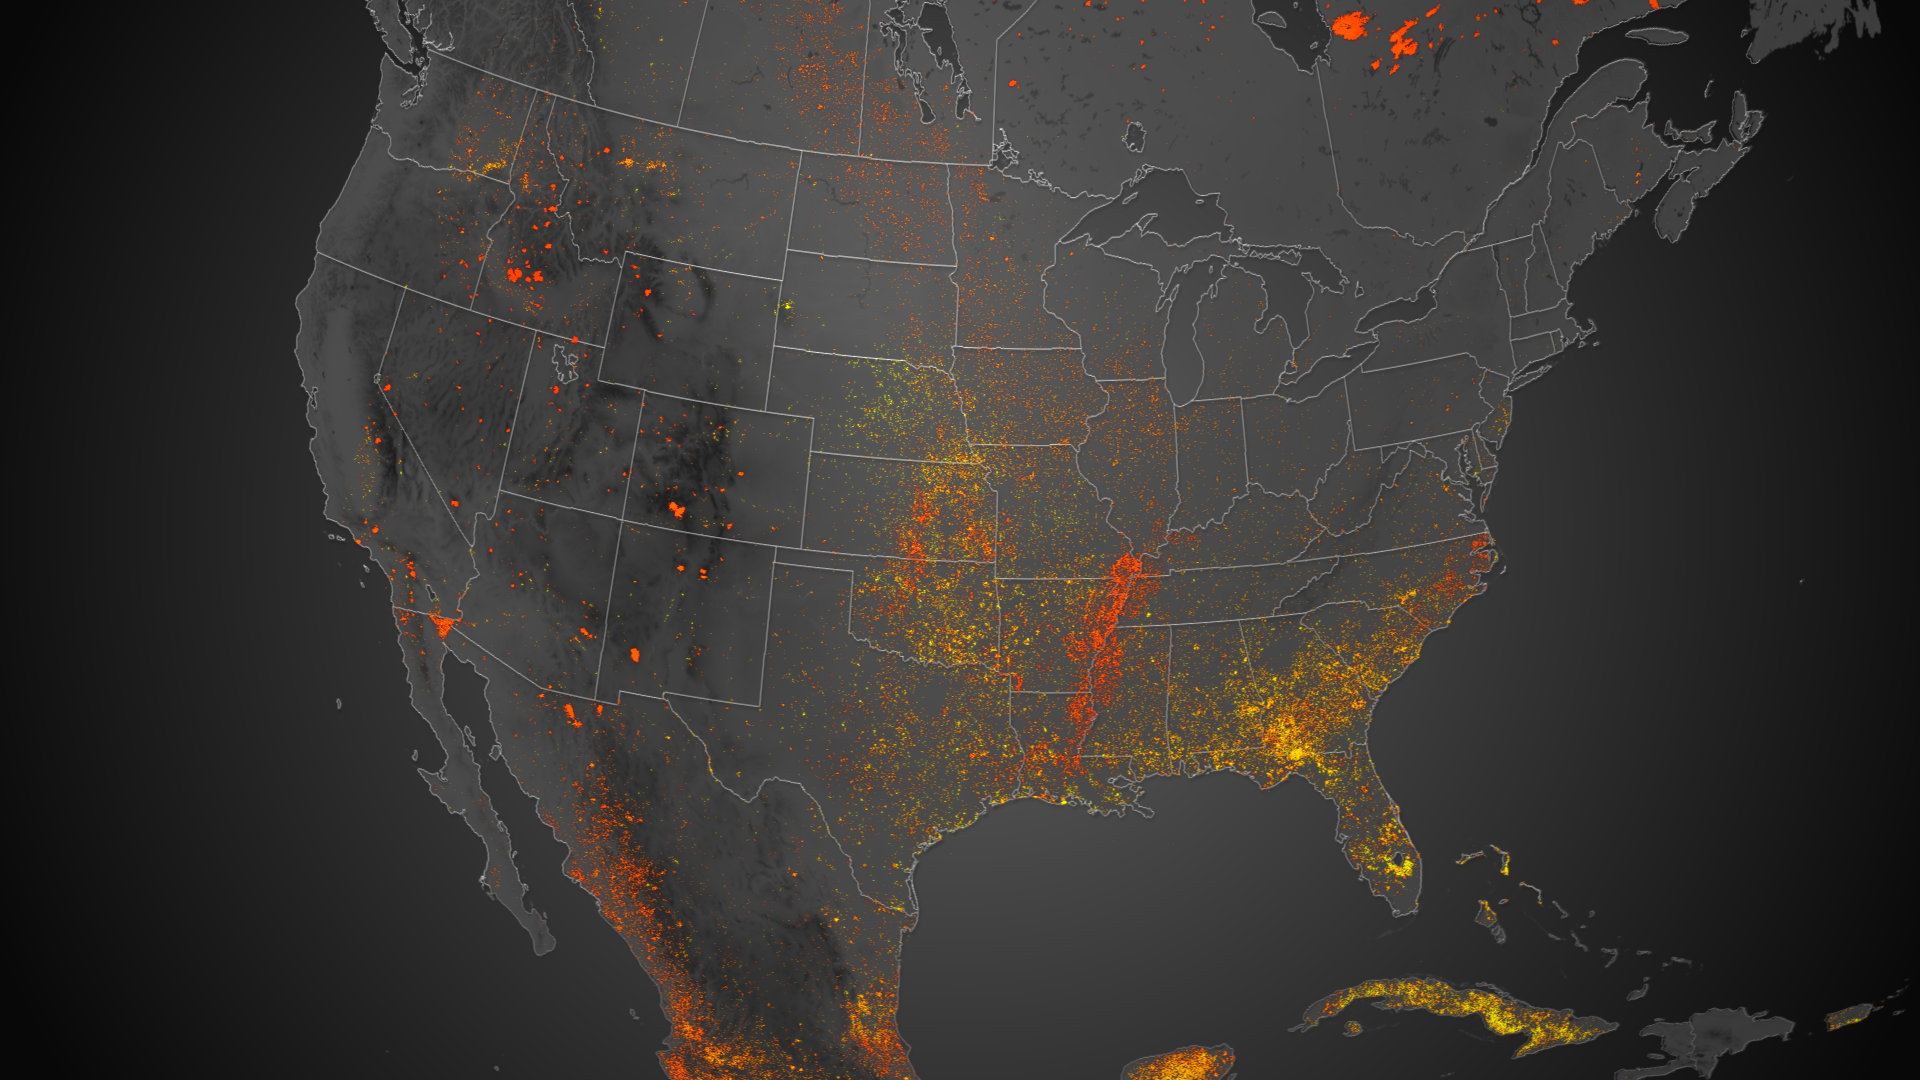 Continent on Fire Map Shows 6 Months of Wildfires Burning North